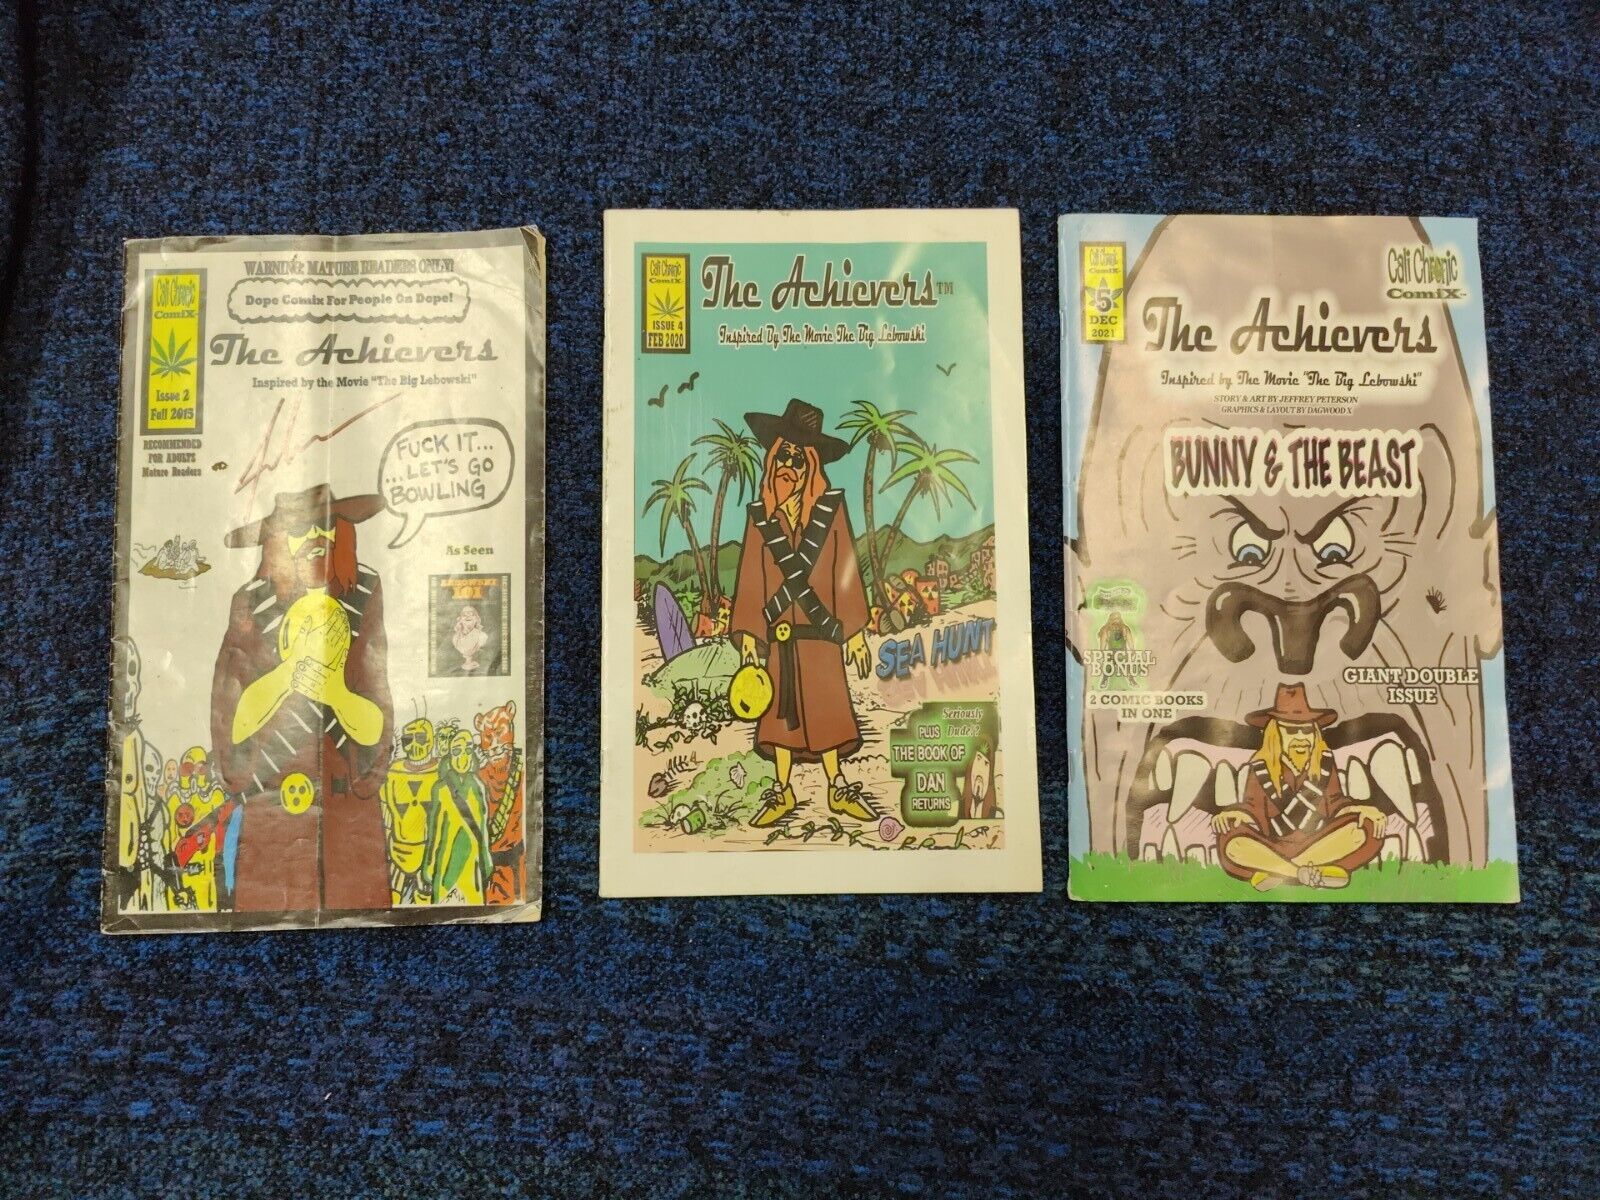 3Cali Chronic ComiX, The Achievers  #2 (signed), #4 unsigned, 5 unsigned.